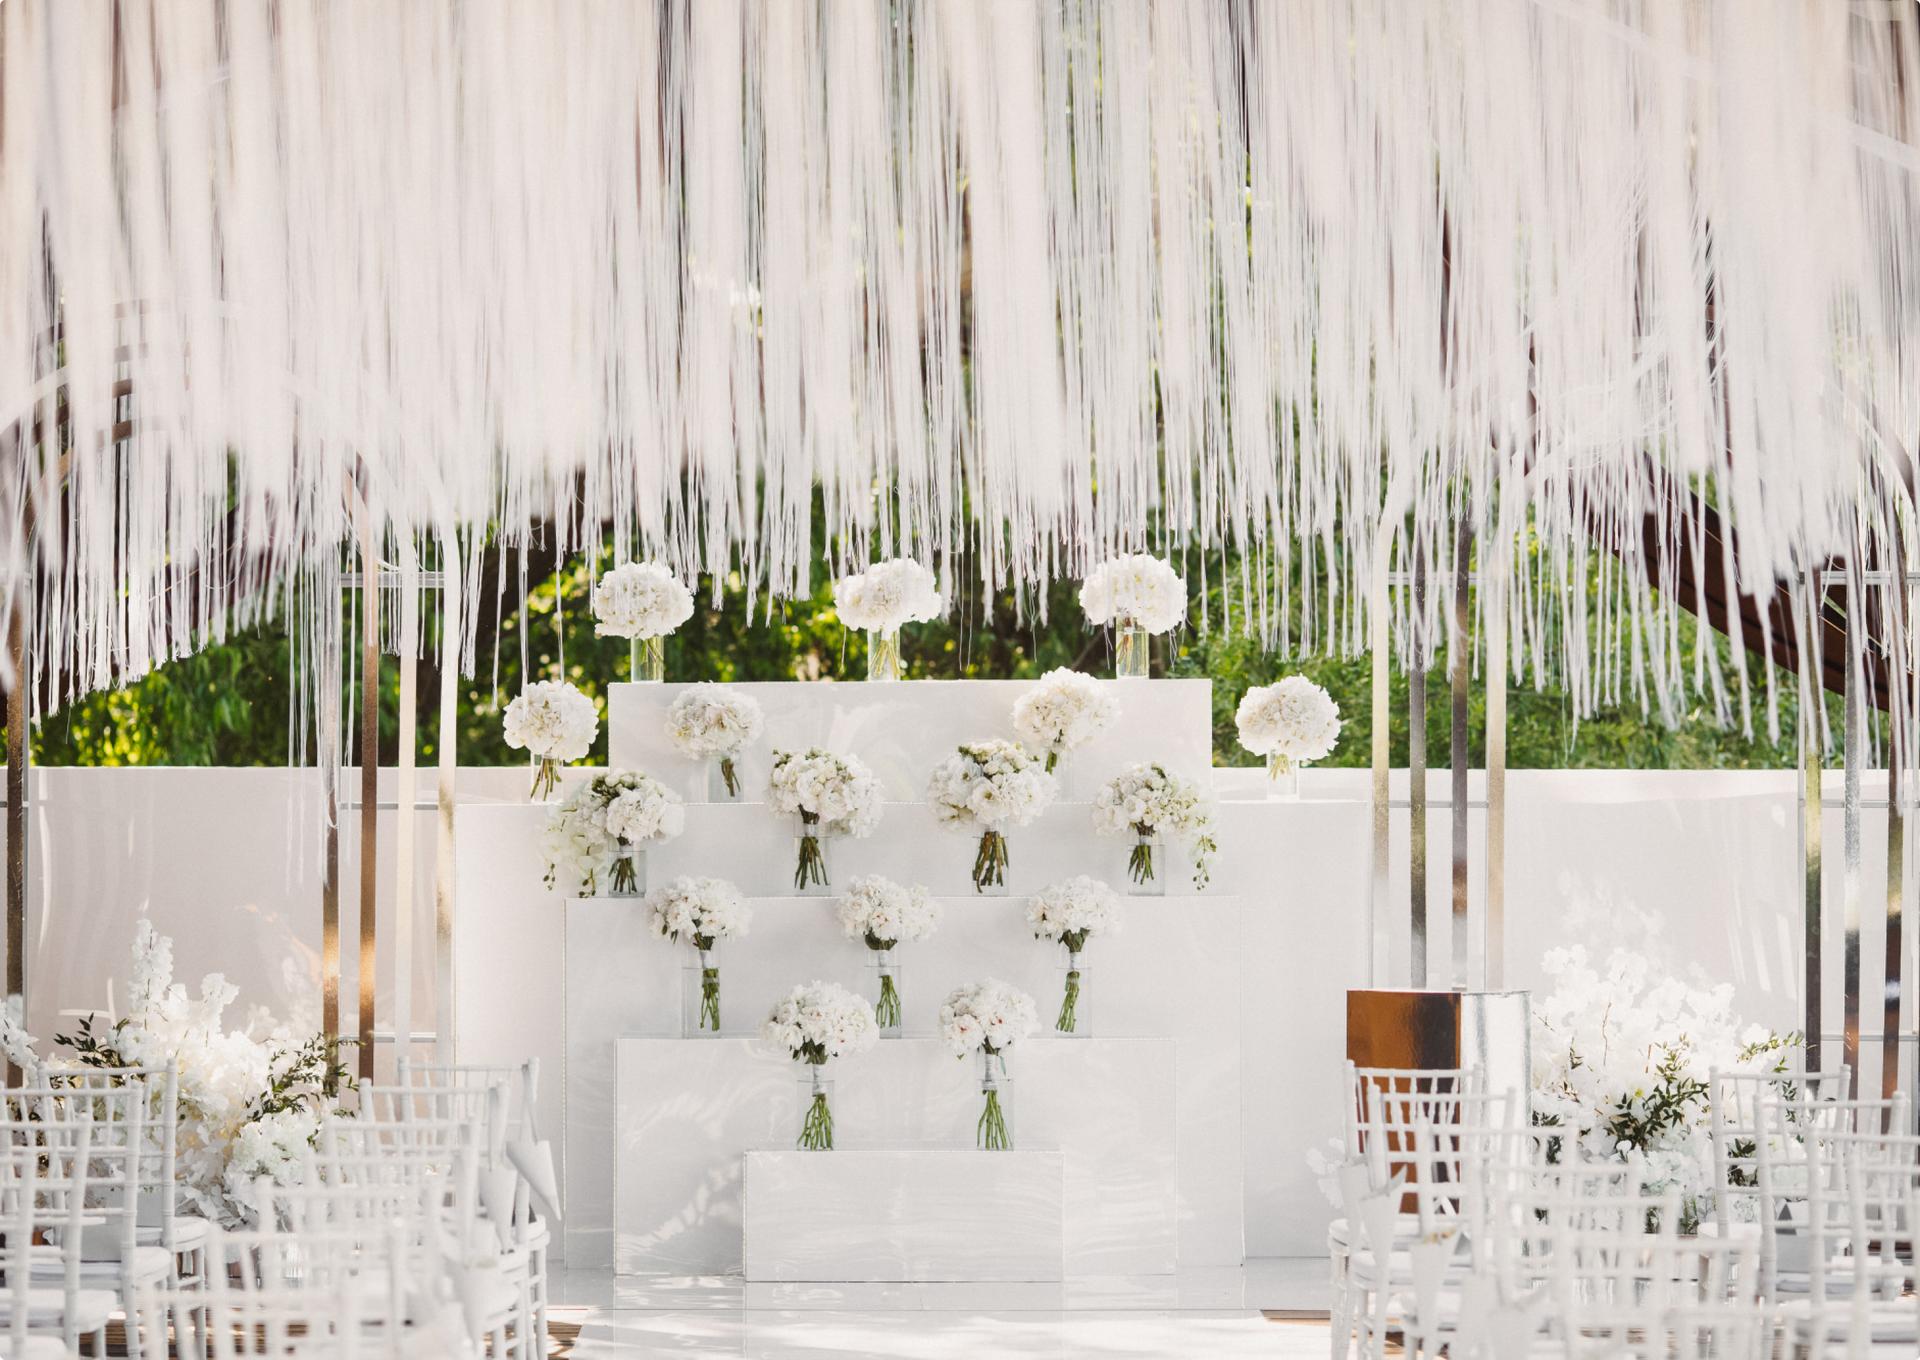 where-to-buy-wedding-decorations-budgetyid